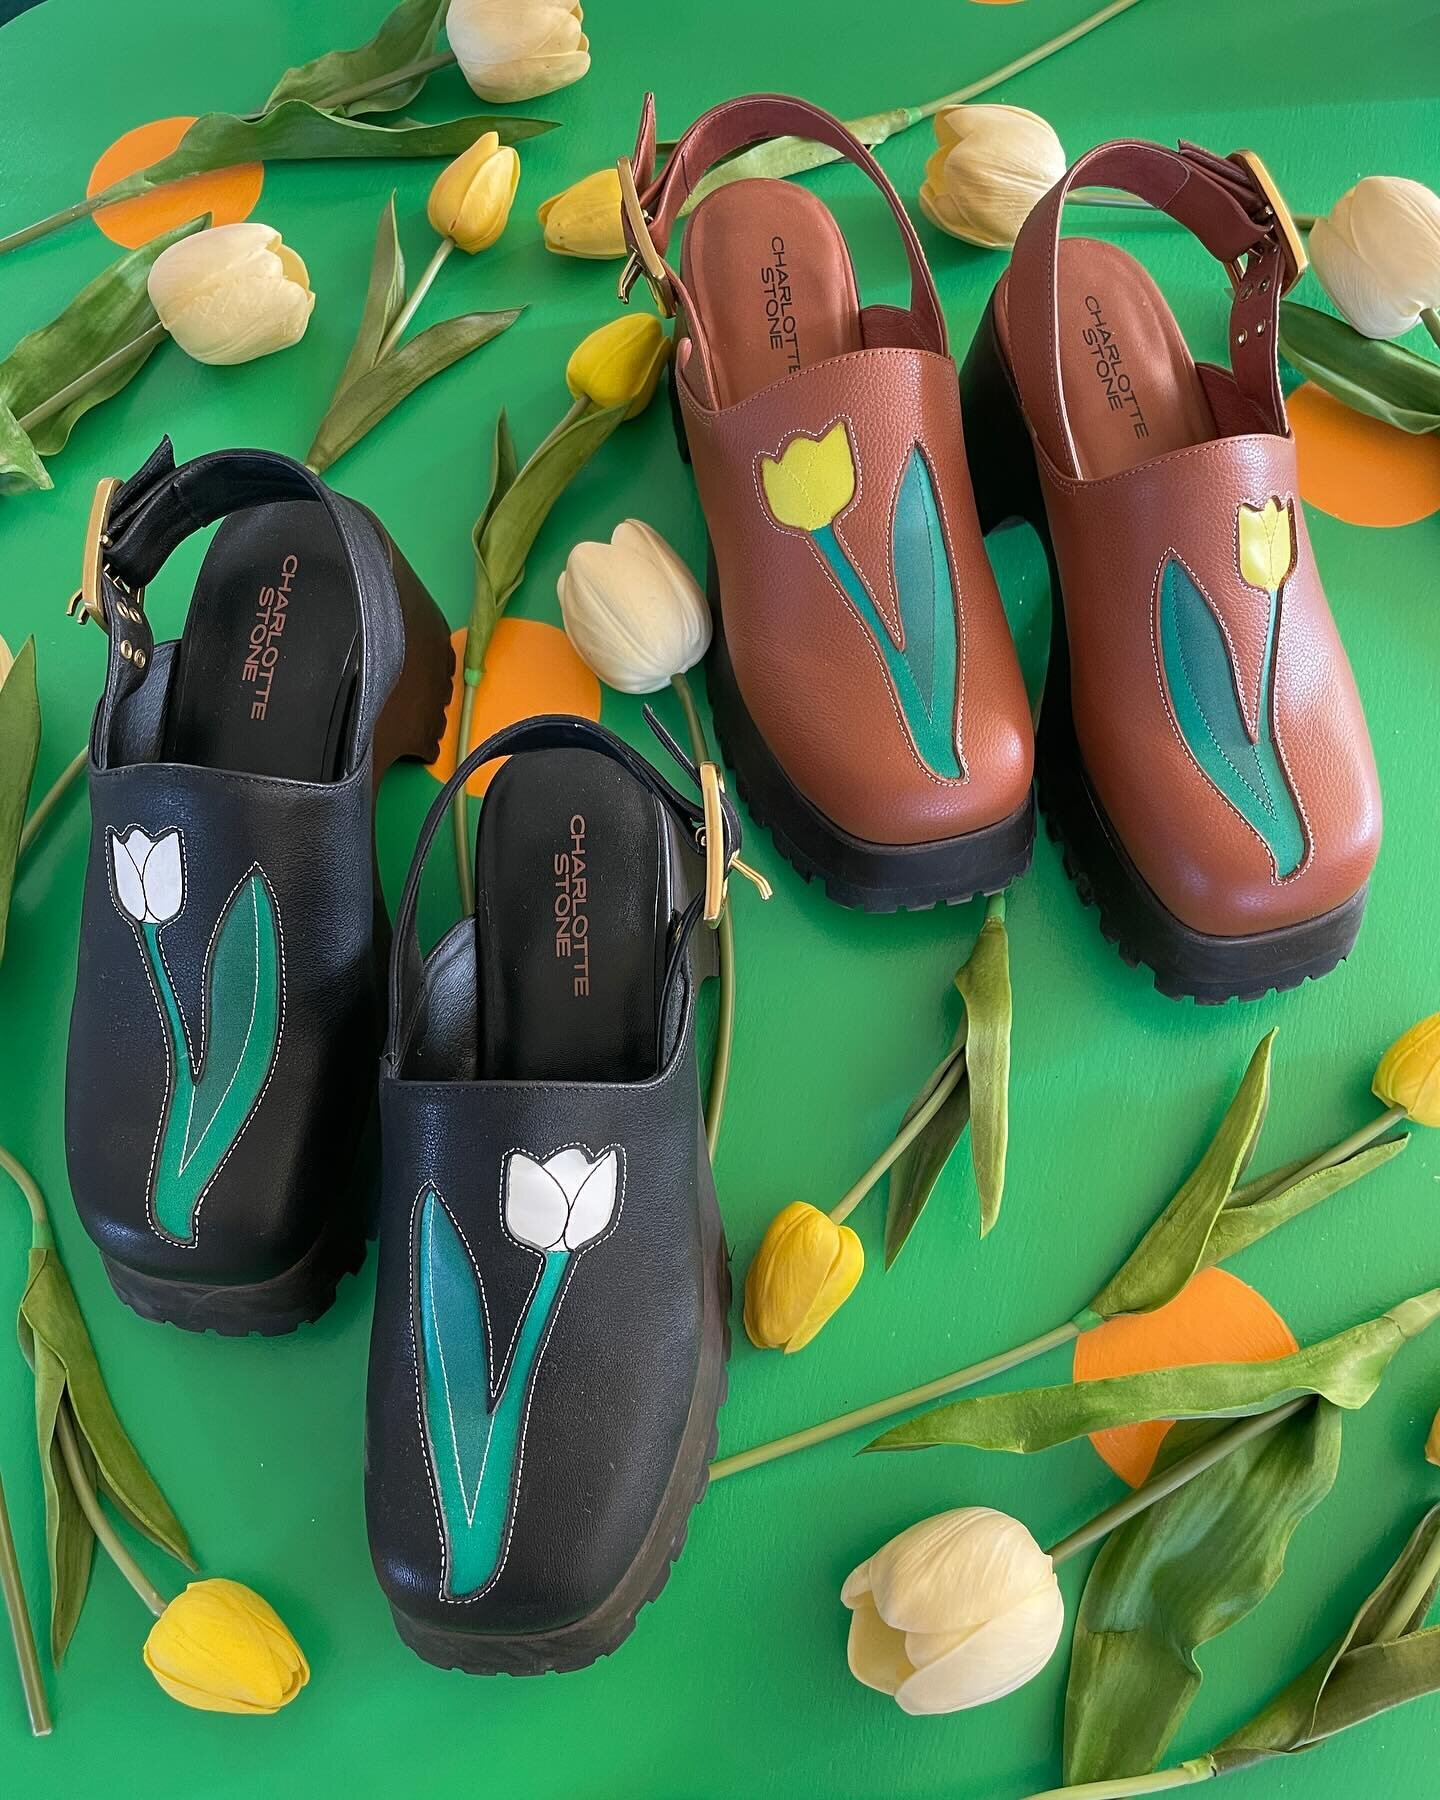 Alert!! The sold out @charlottestoneshoes x Lorien Stern Clogs are back for a limited preorder 🐌🌷🌷🌷 Charlotte-stone.com 🌷🌷🌷🐛